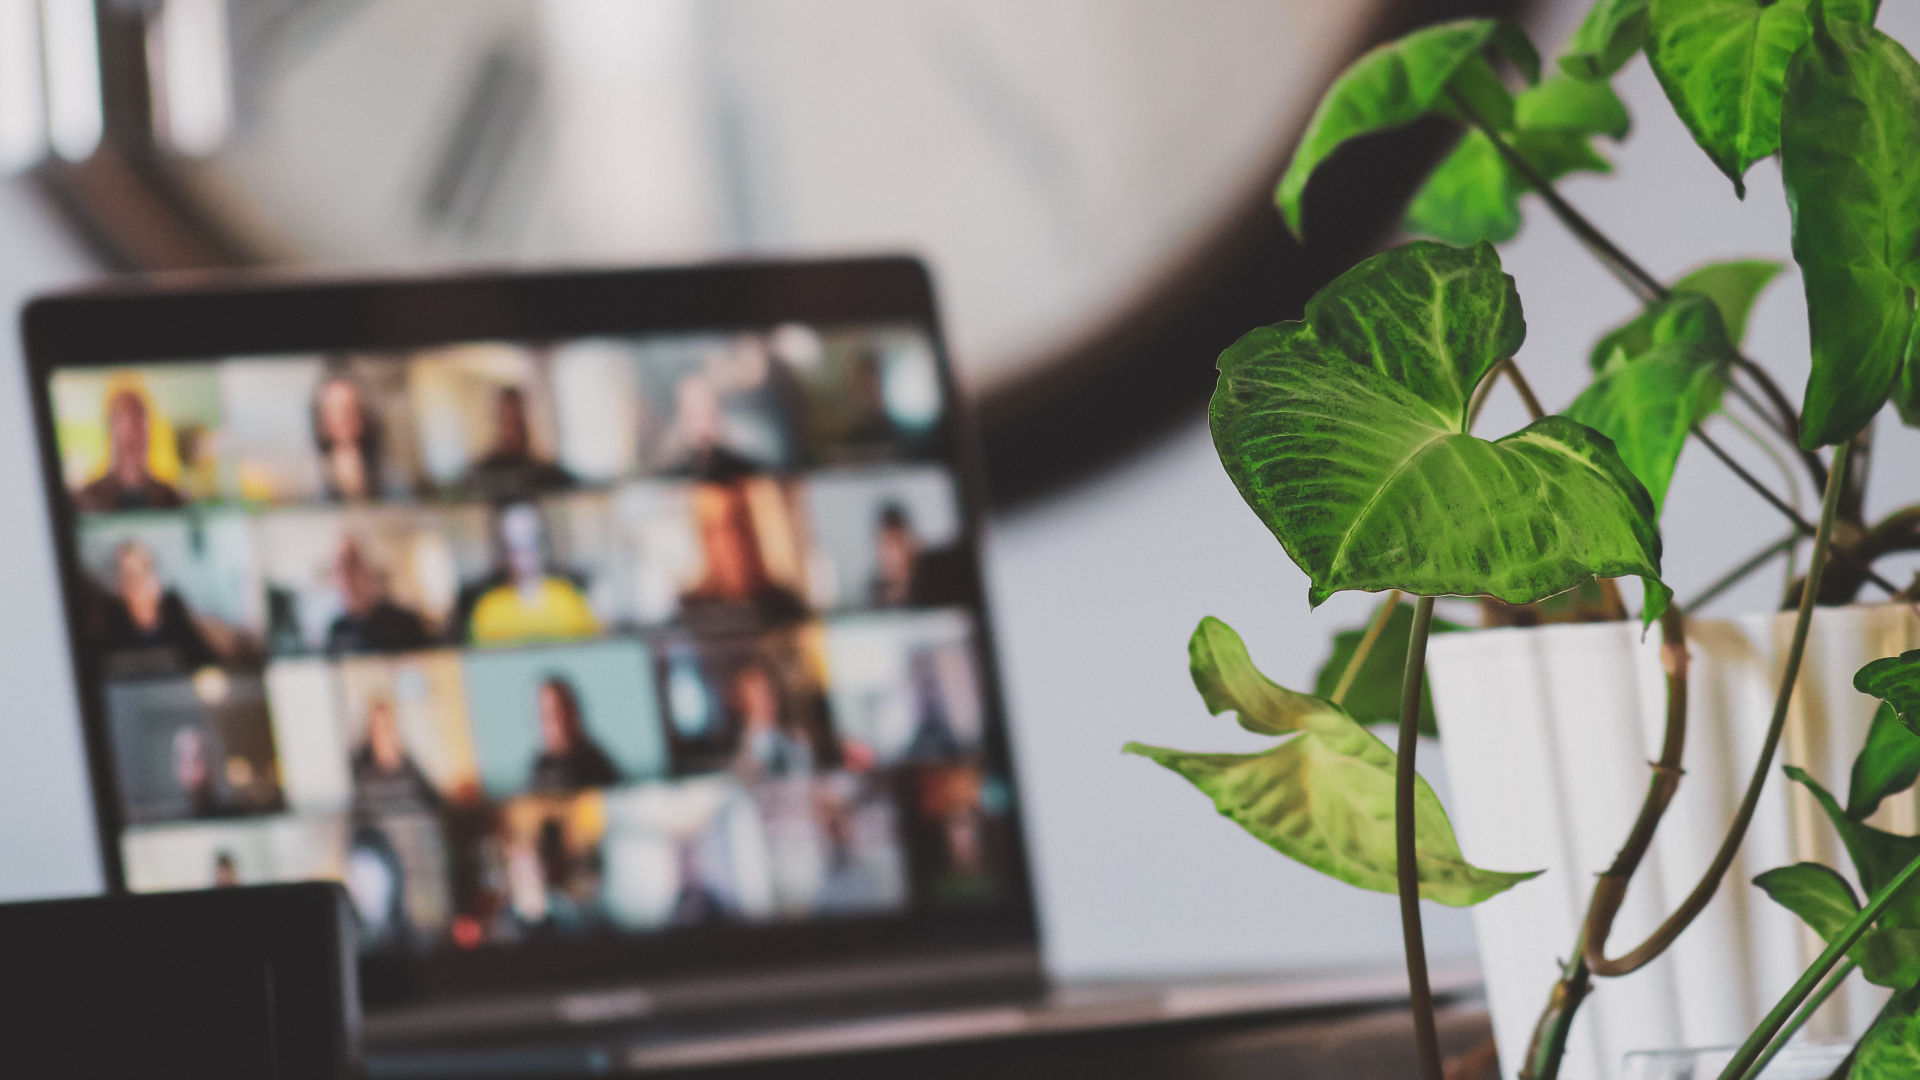 Image of a laptop in an online team meeting with a plant